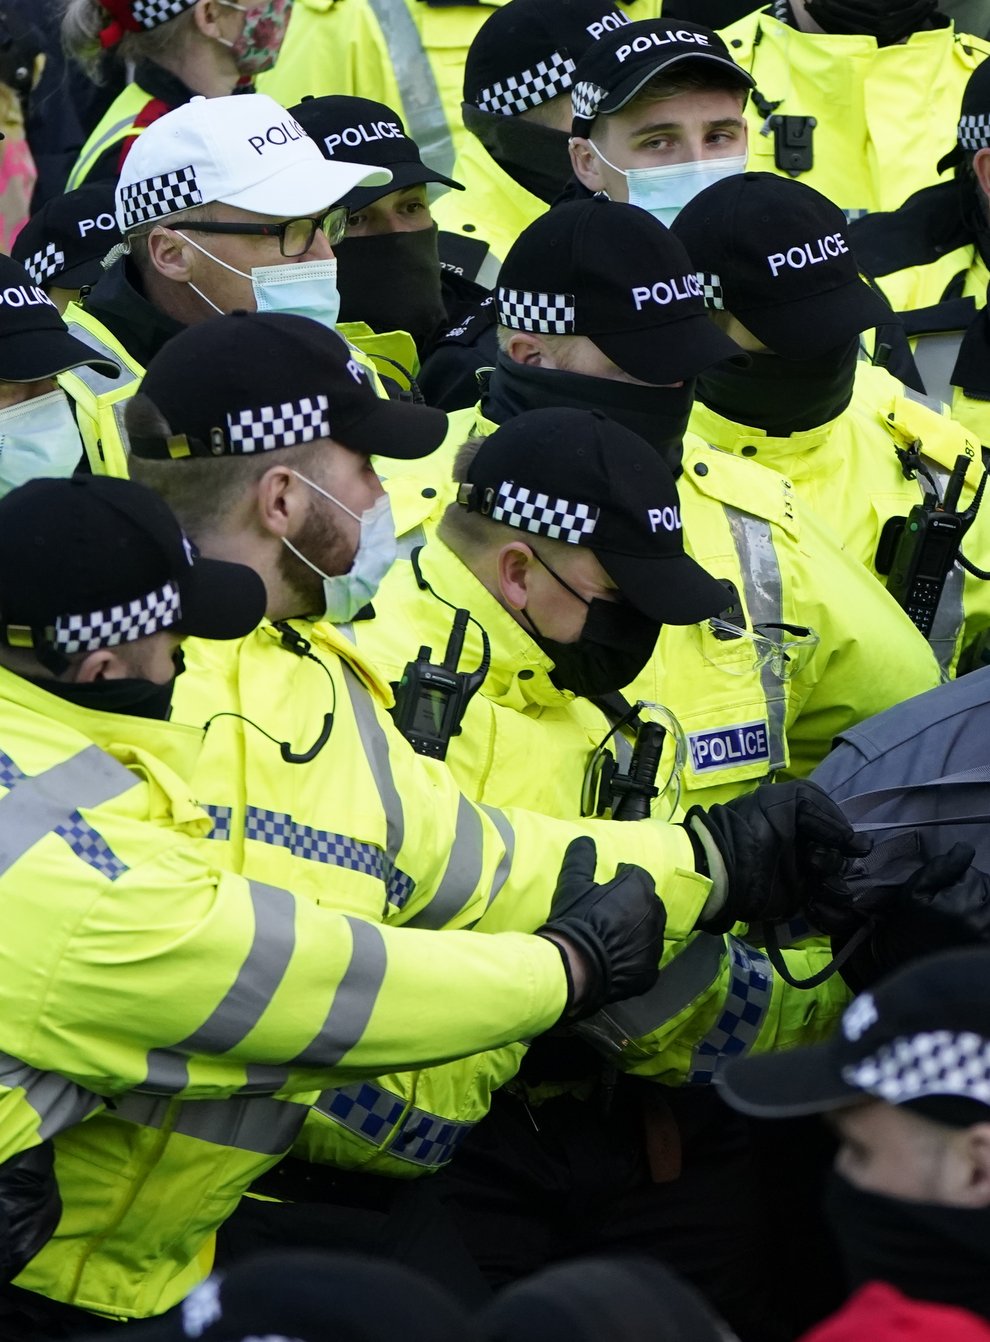 Police tug at a bag as they halt part of a march by protesters taking part in a rally organised by the Cop26 Coalition in Glasgow demanding global climate justice. (Danny Lawson/PA)